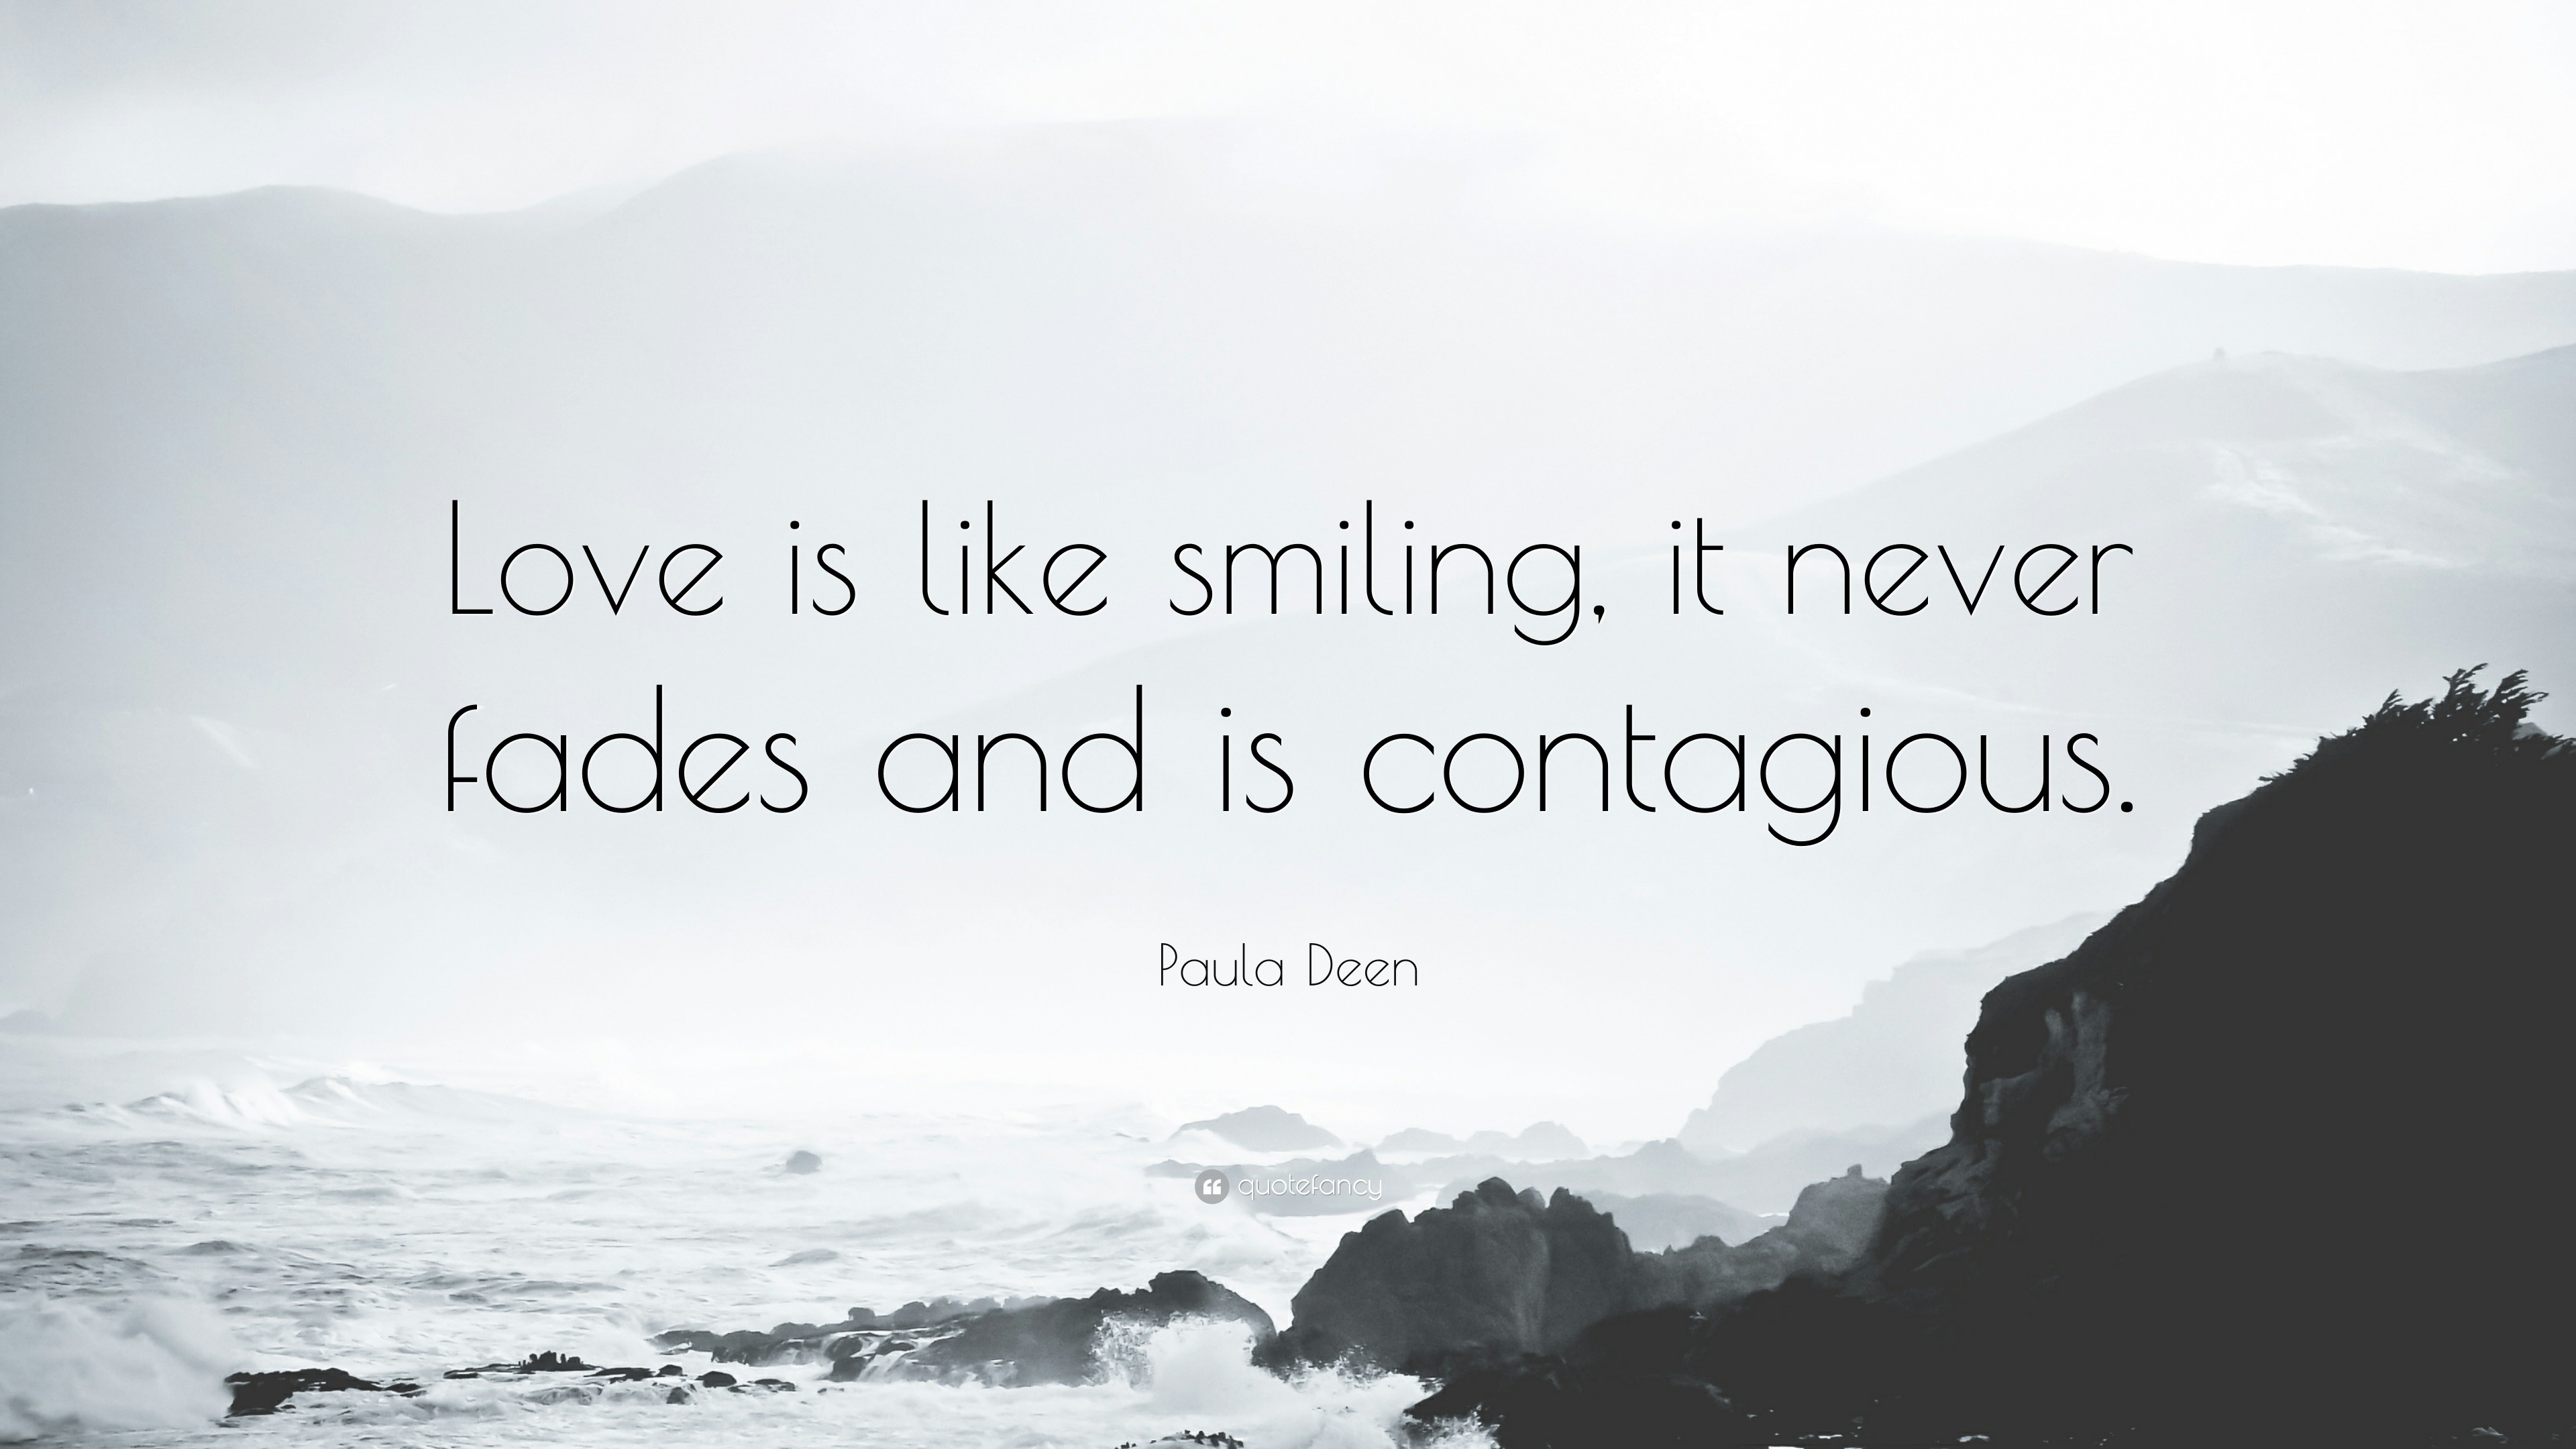 Paula Deen Quote “Love is like smiling it never fades and is contagious